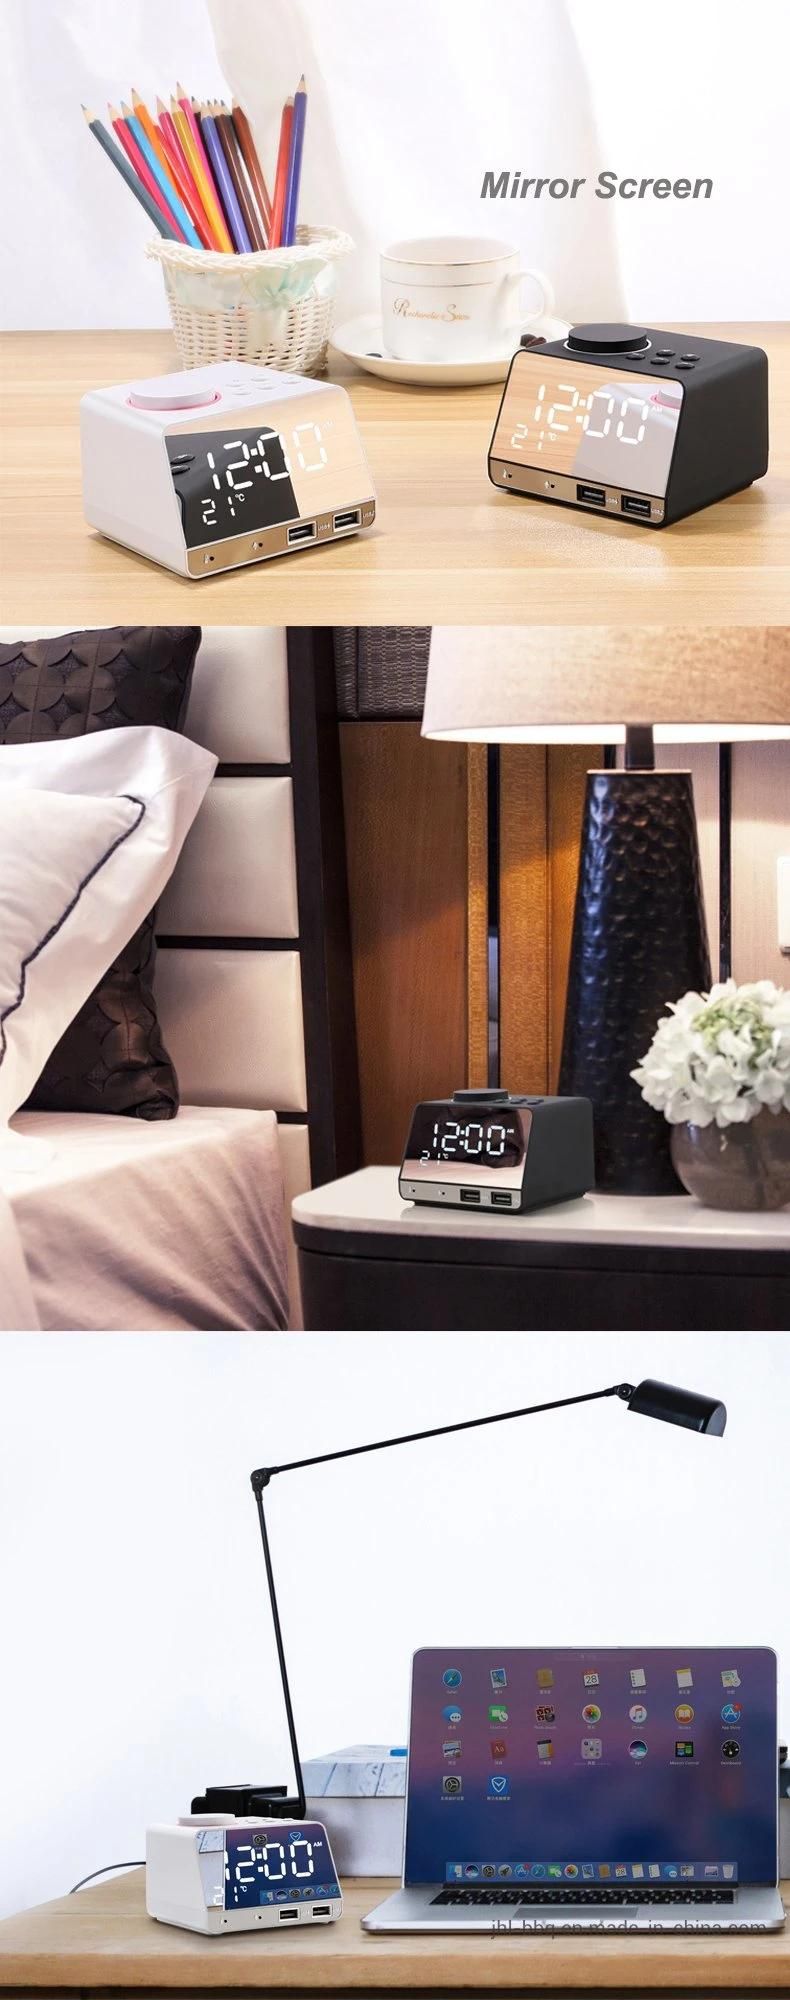 2019 Fashion Desk and Table Clock with Blue Tooth 4.2 MP3 Play and Dual Alarm FM Radio Speaker Dual USB Charging Week and Temperature Display